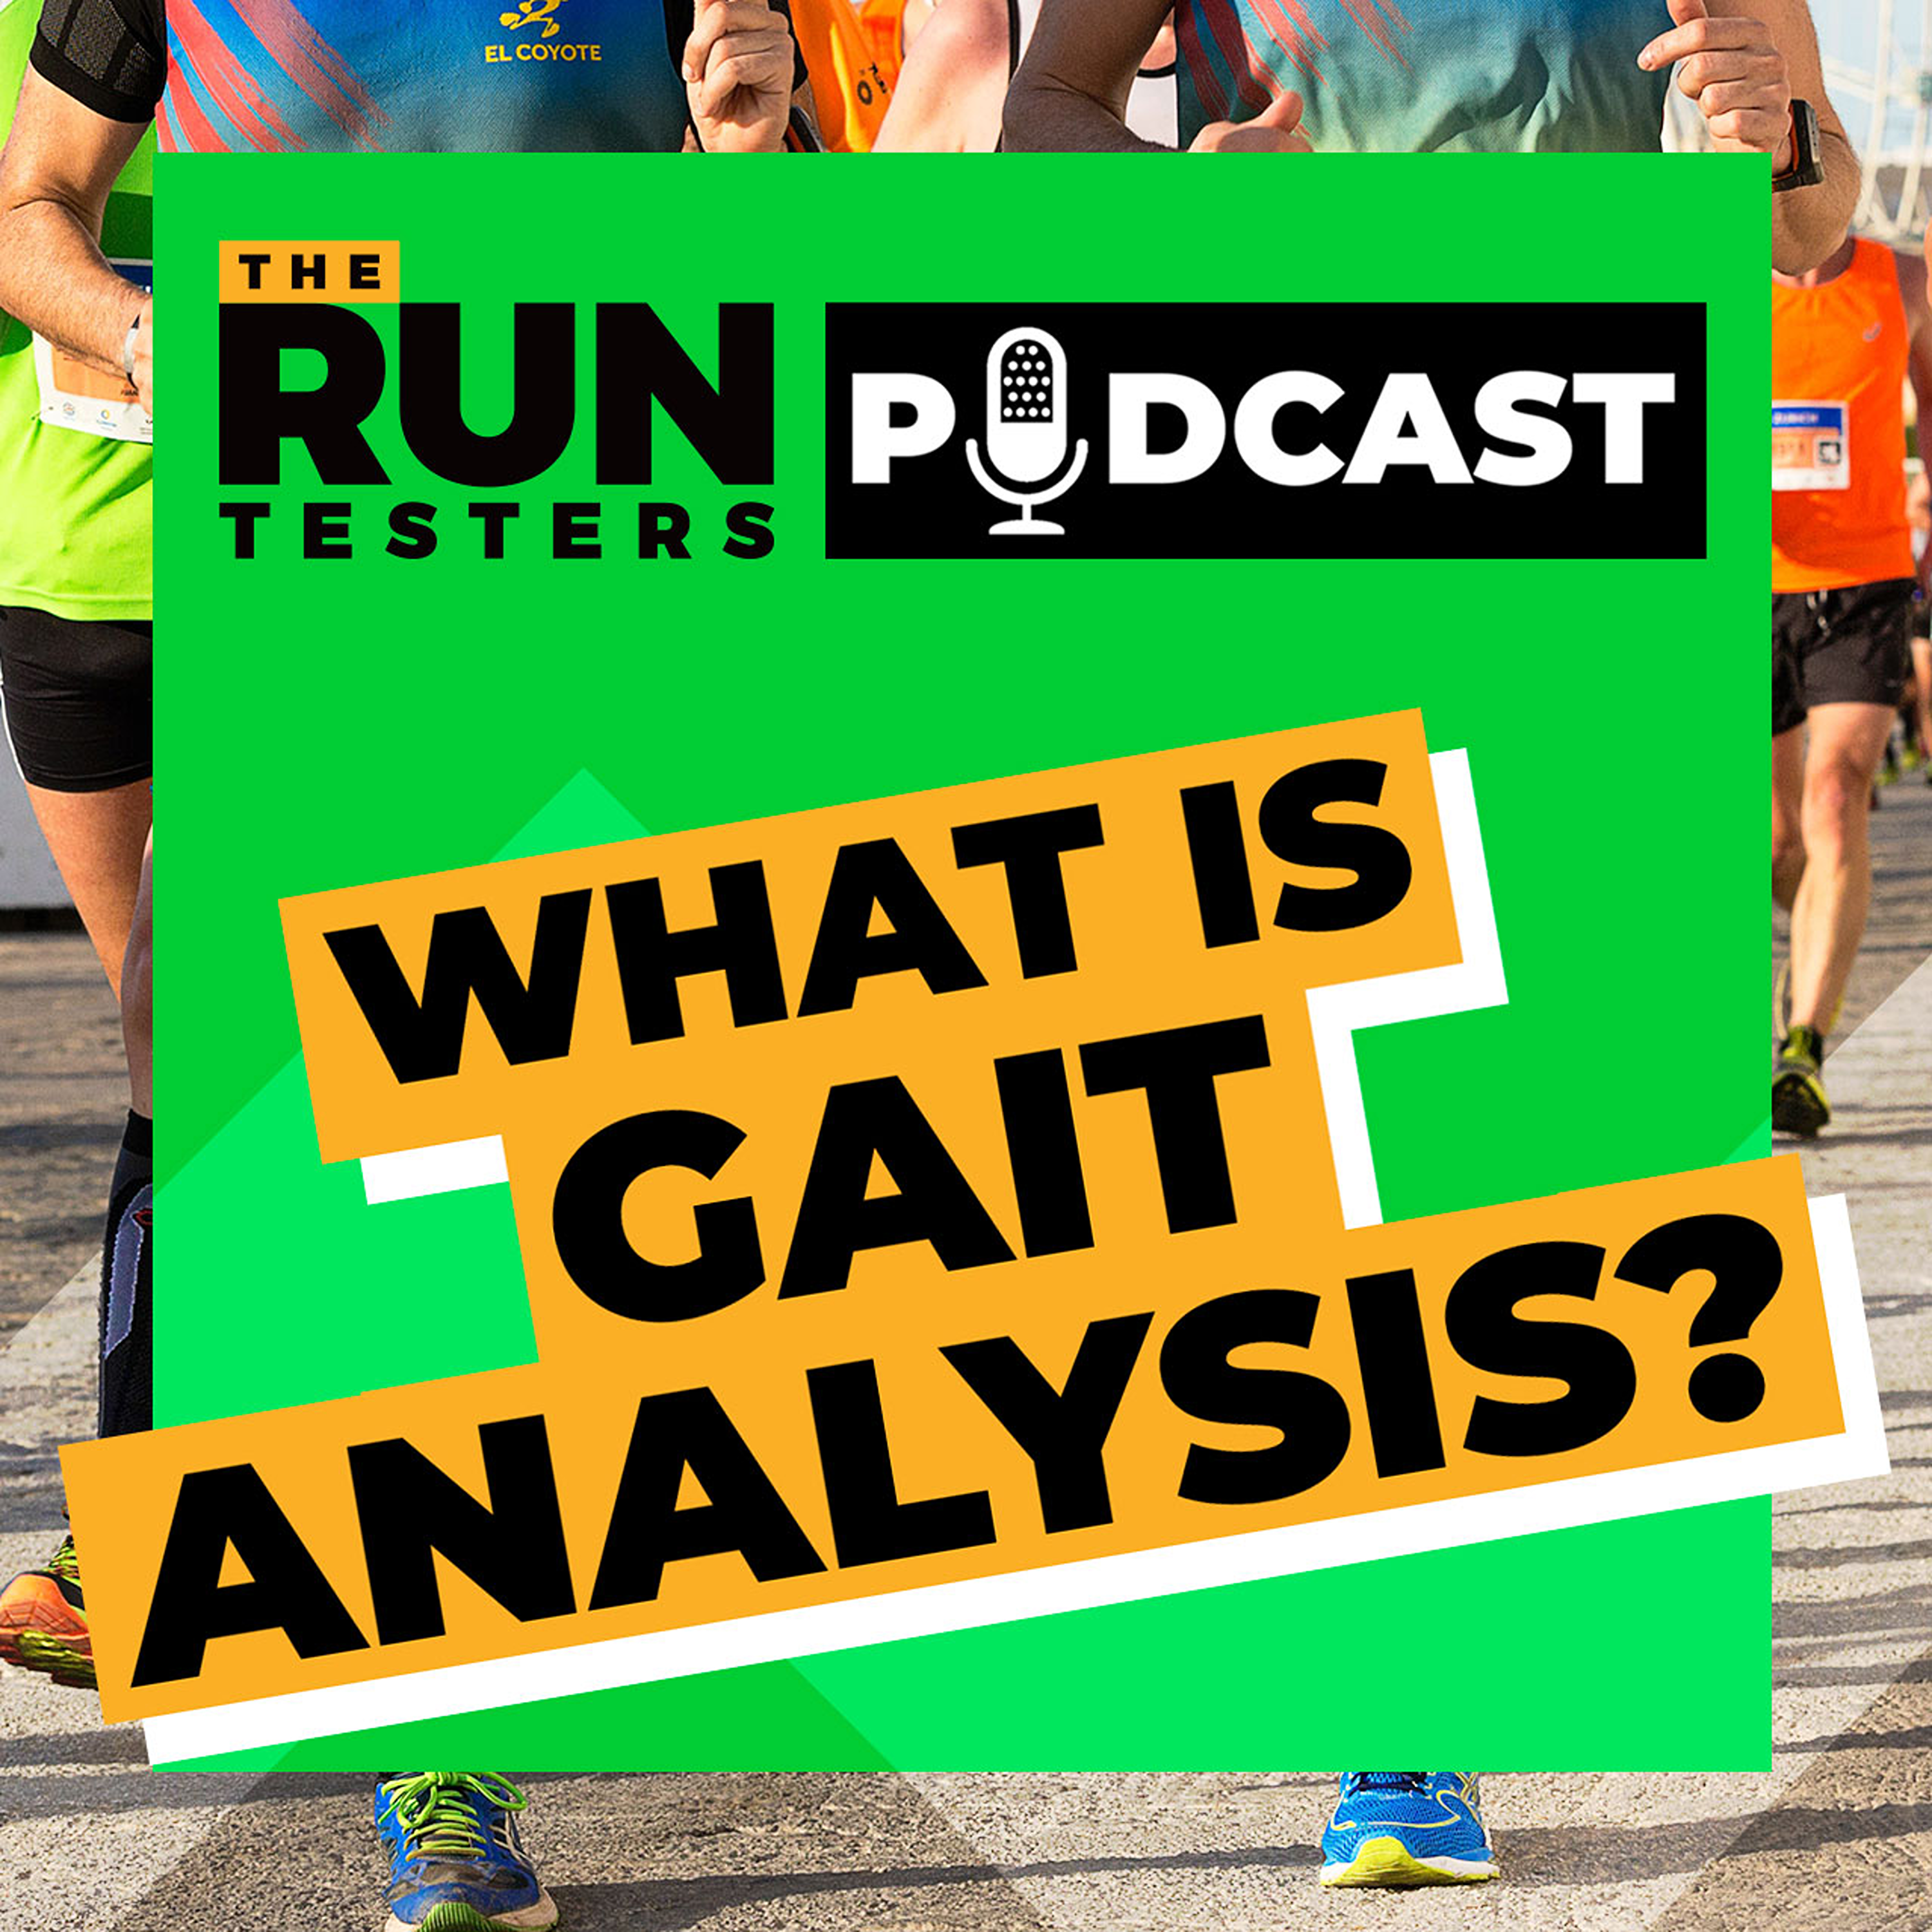 How Gait Analysis Can Improve Your Running | With Performance Experts Human Powered Health